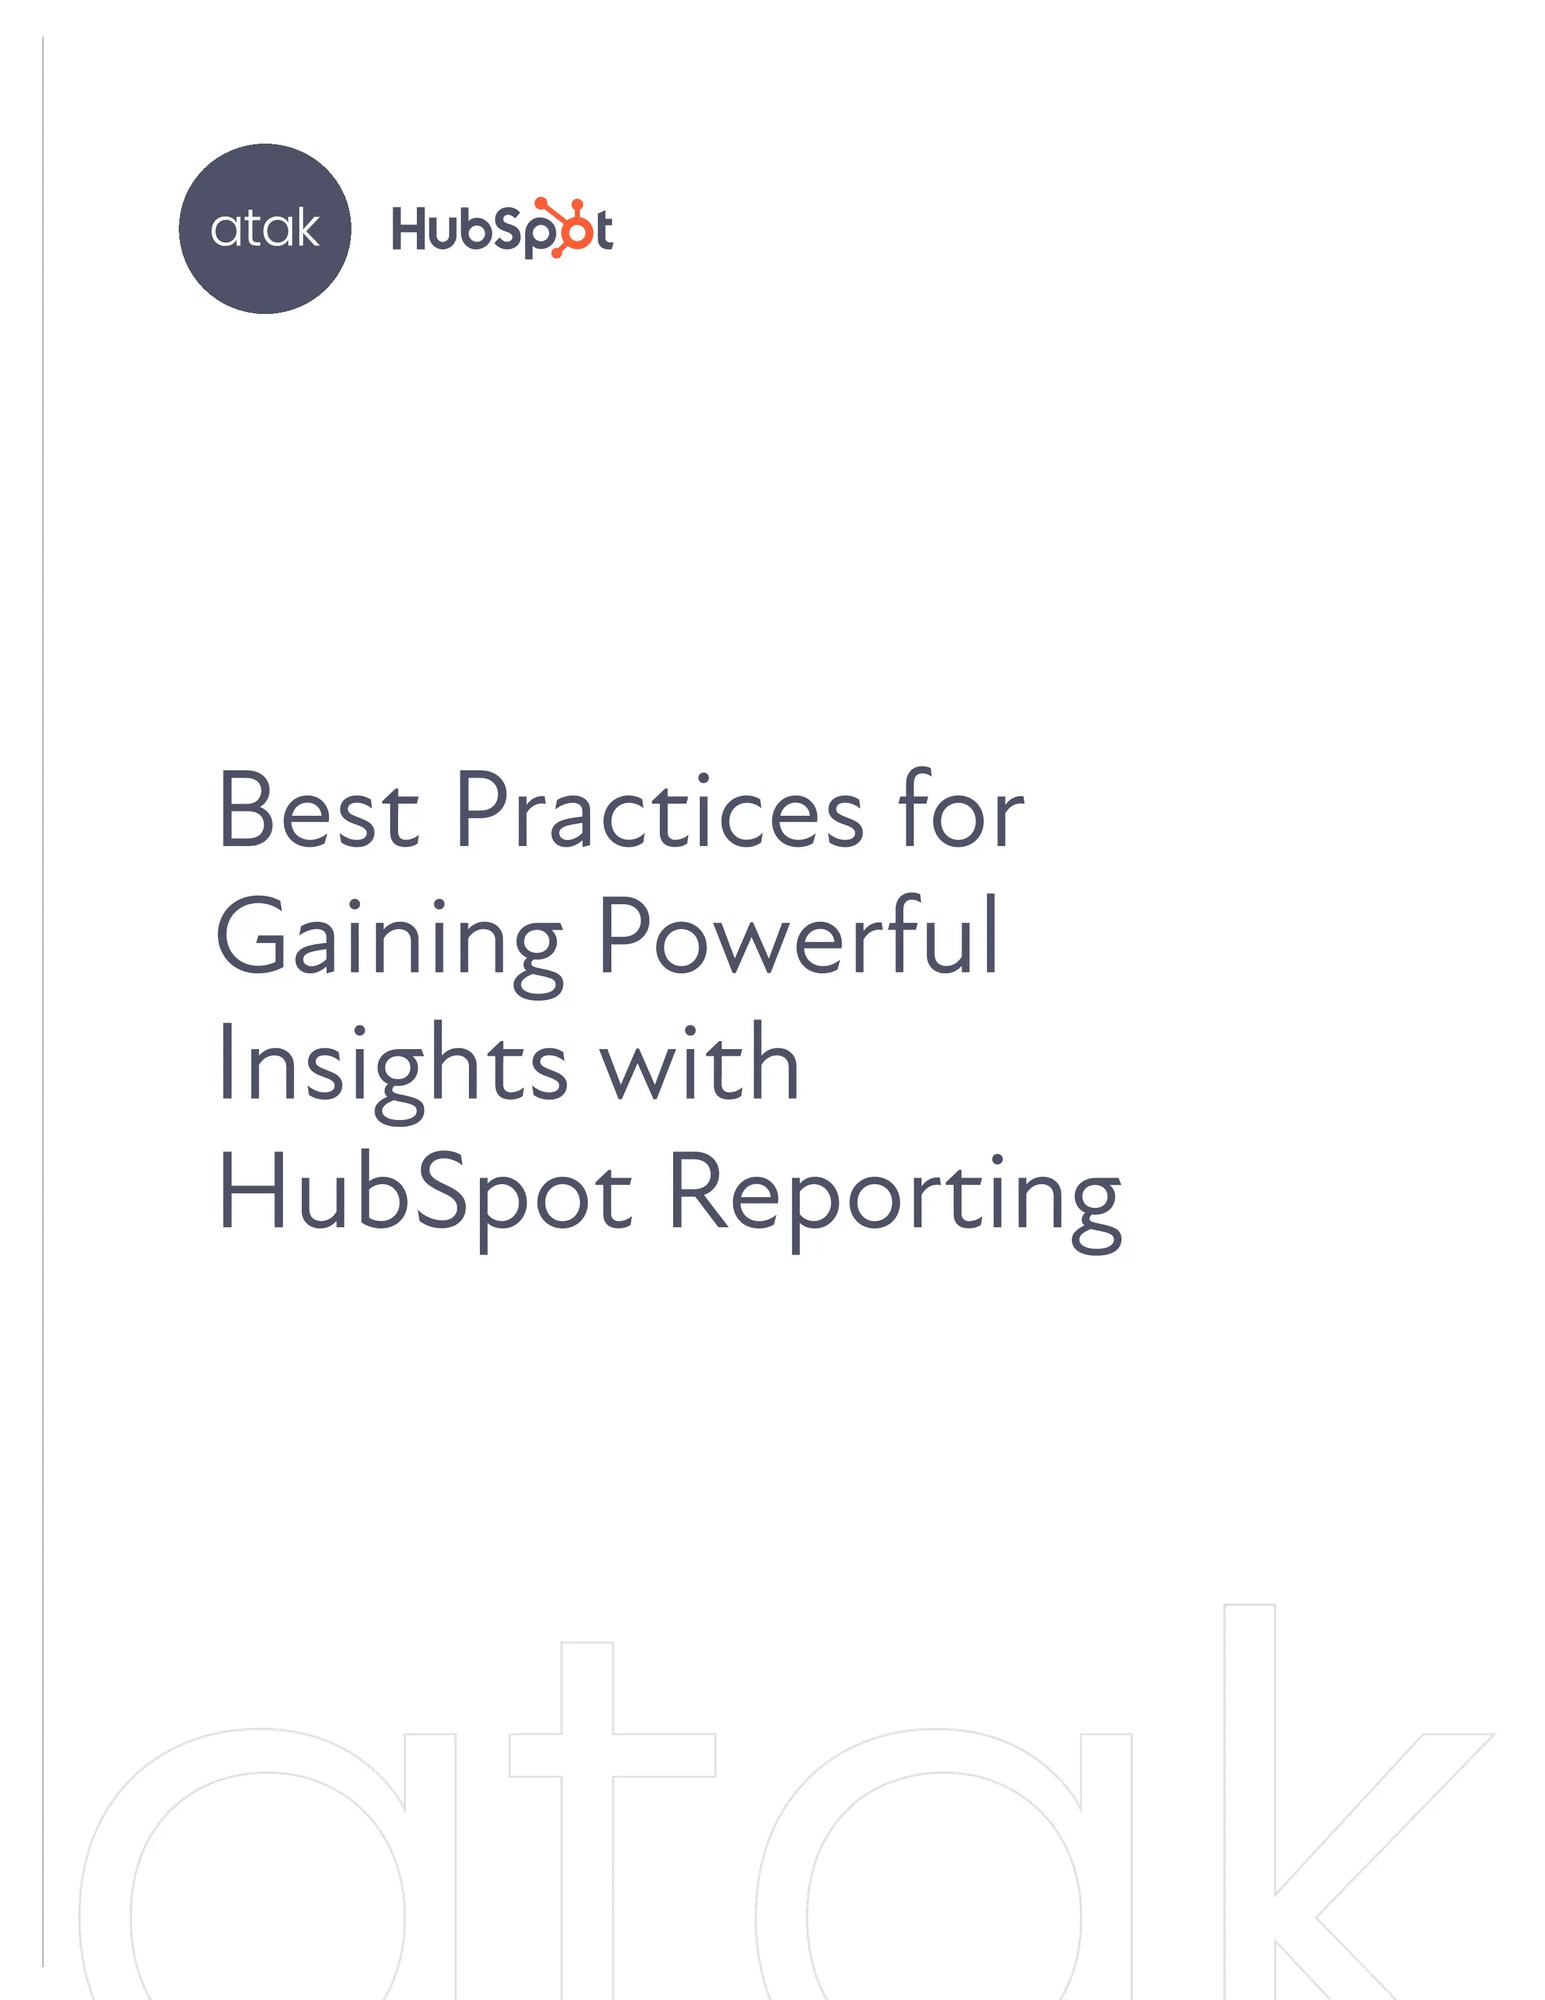 Best Practices for Gaining Powerful Insights with HubSpot Reporting-1